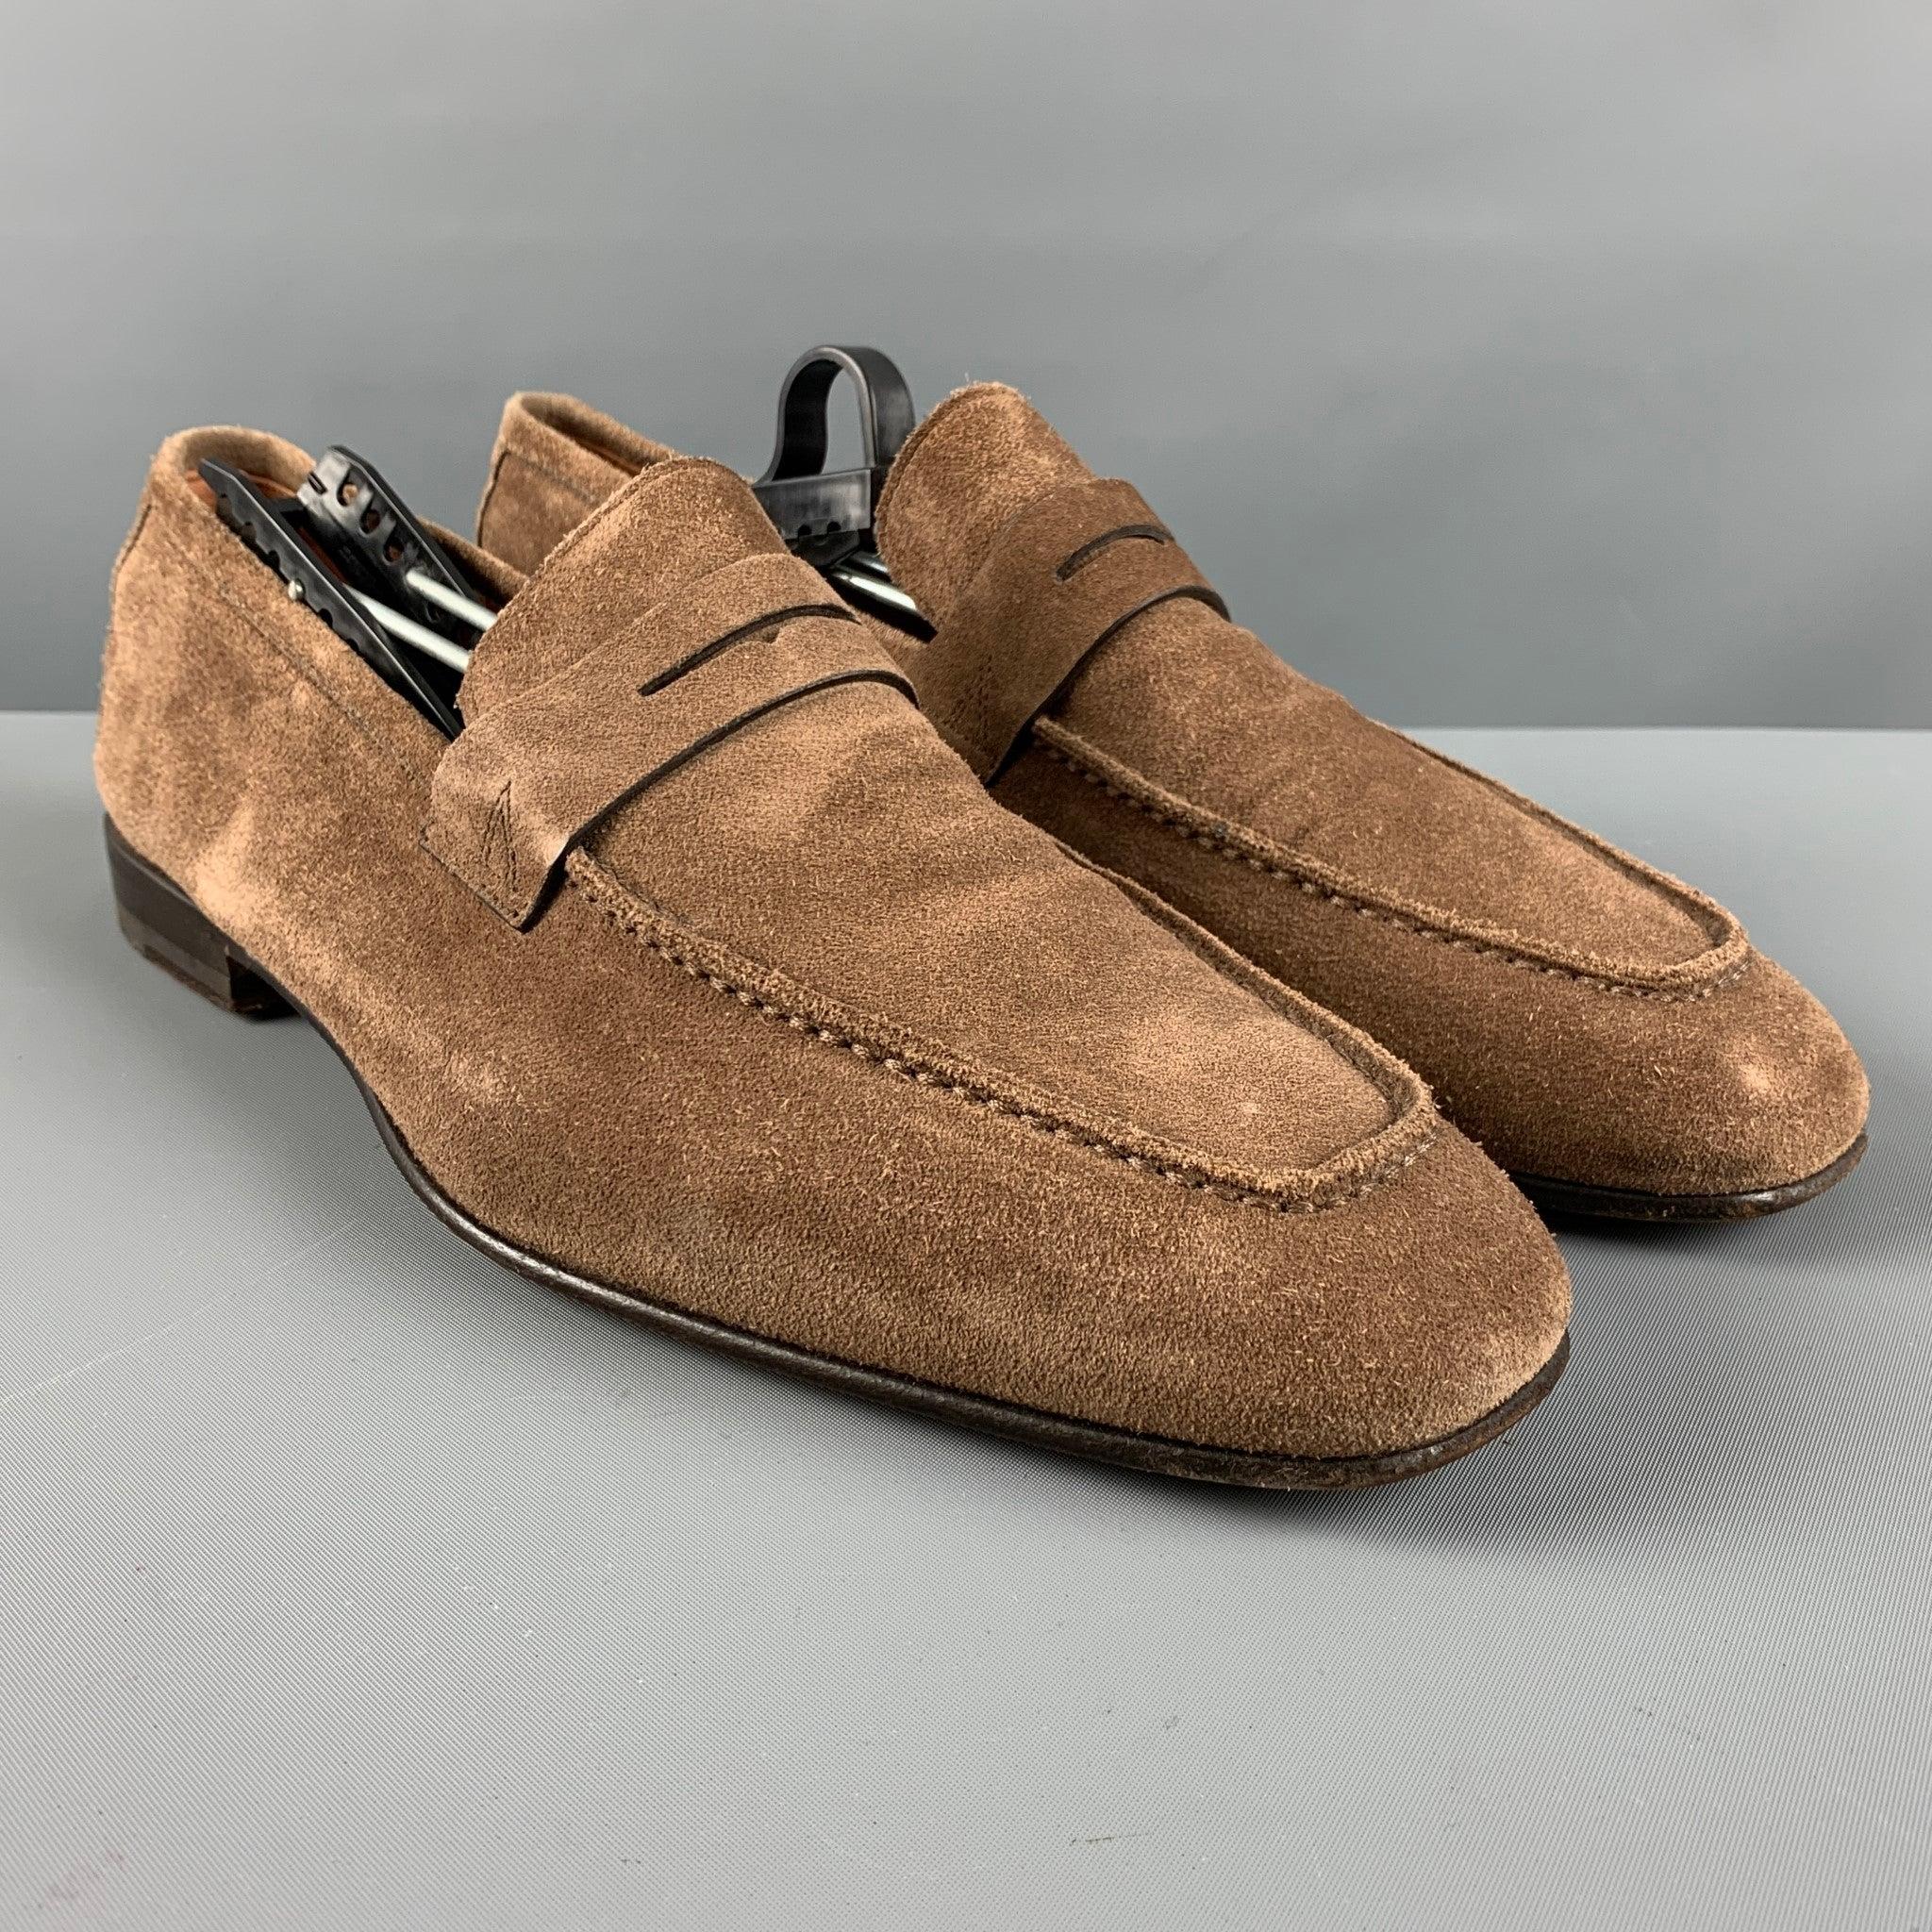 SANTONI loafers comes in brown suede featuring a square toe front, penny loafer style, and a wood sole. Made in Italy.Very Good Pre-Owned Condition. Minor marks of wear.Marked Size: 8 1/2MeasurementsLength: 12 inWidth: 4 in
  
  
 
Reference: